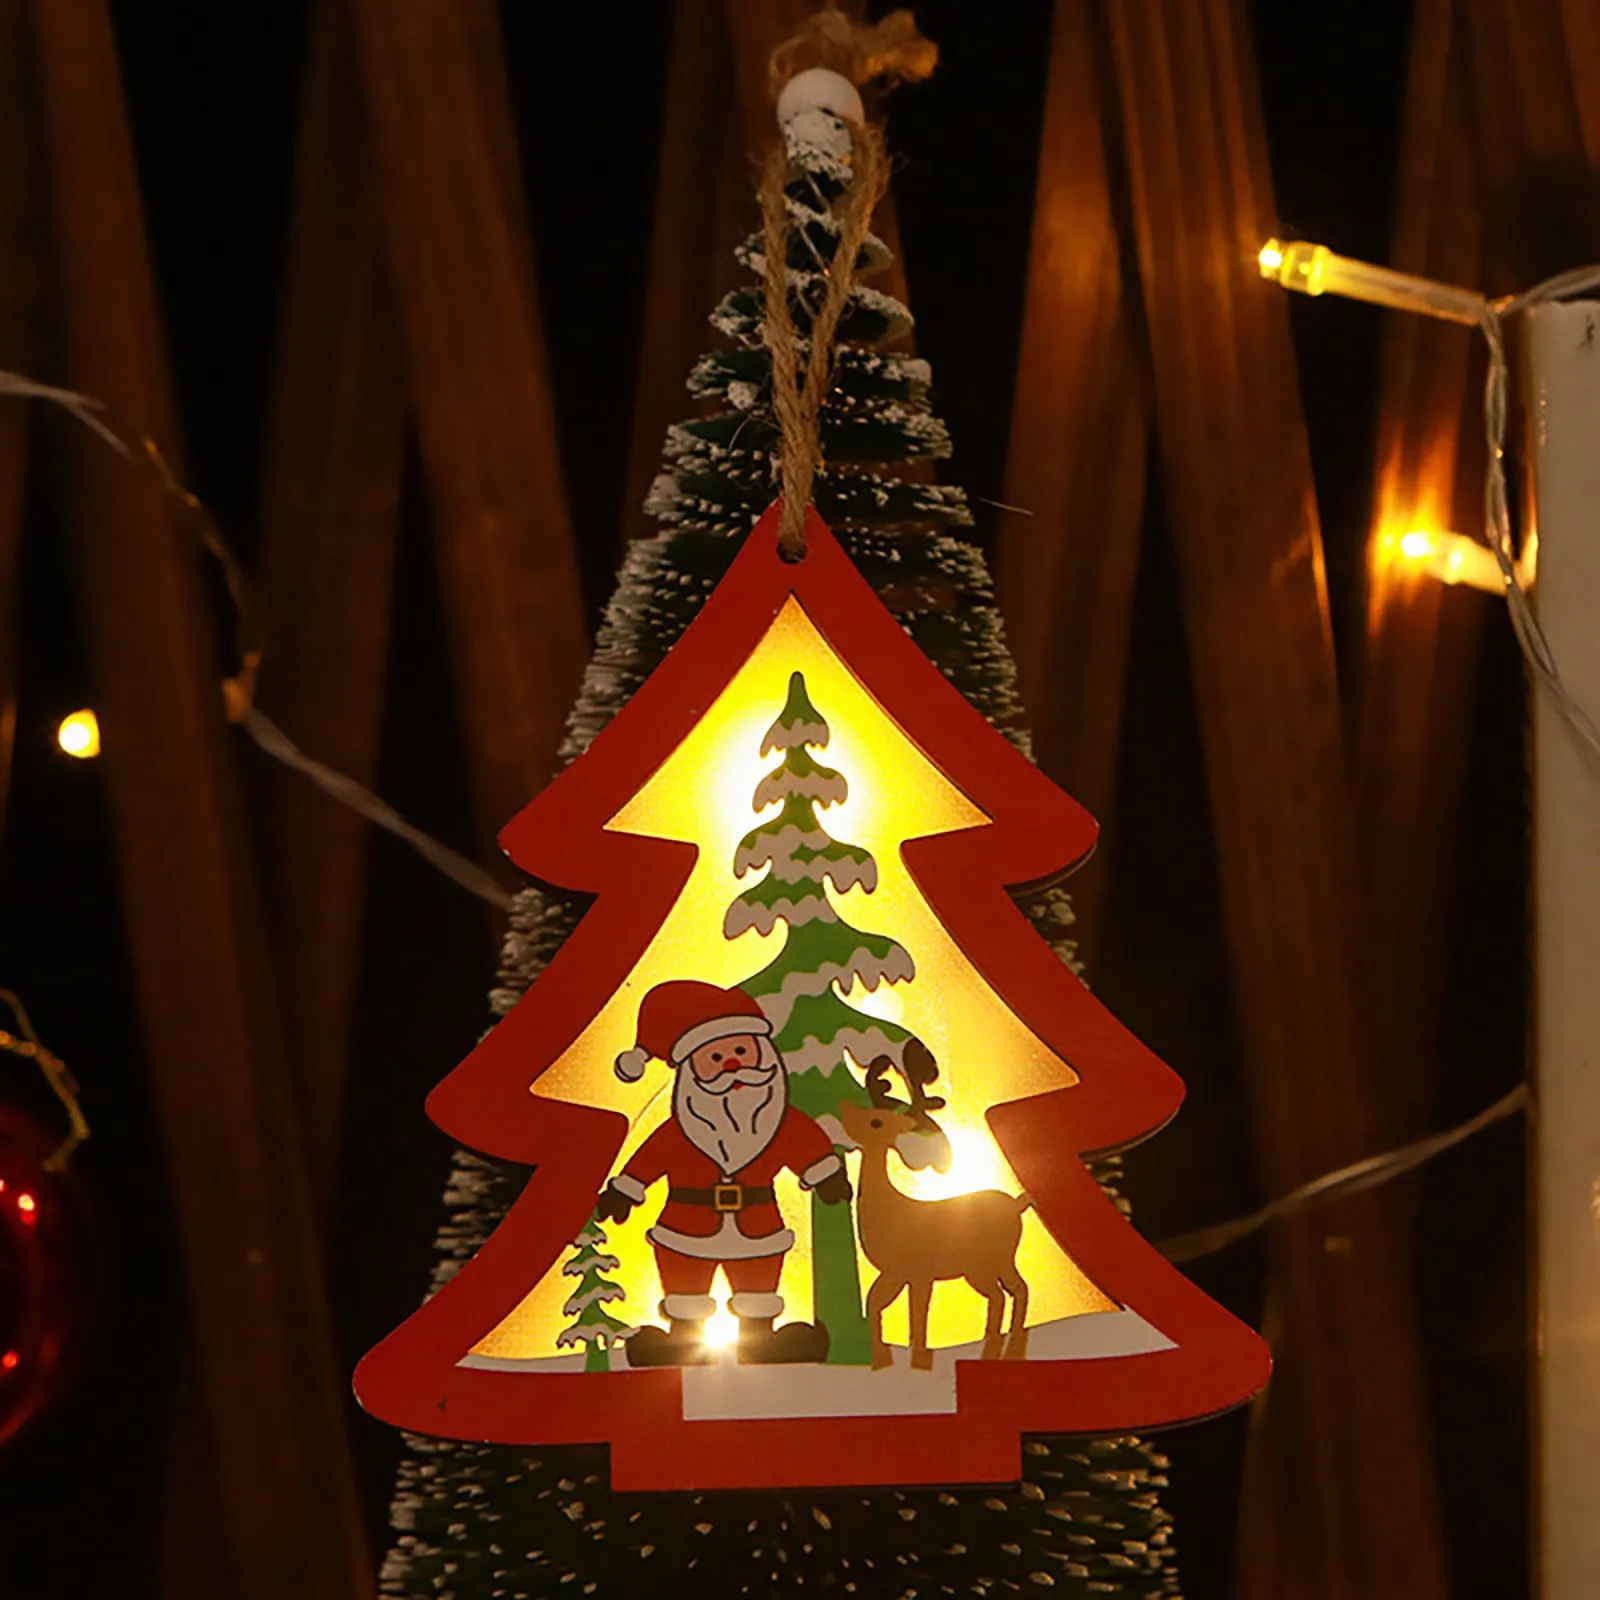 Details about   Hollow Wooden Pendant Creative Light Included Car Tree Ornaments Christmas Decor 